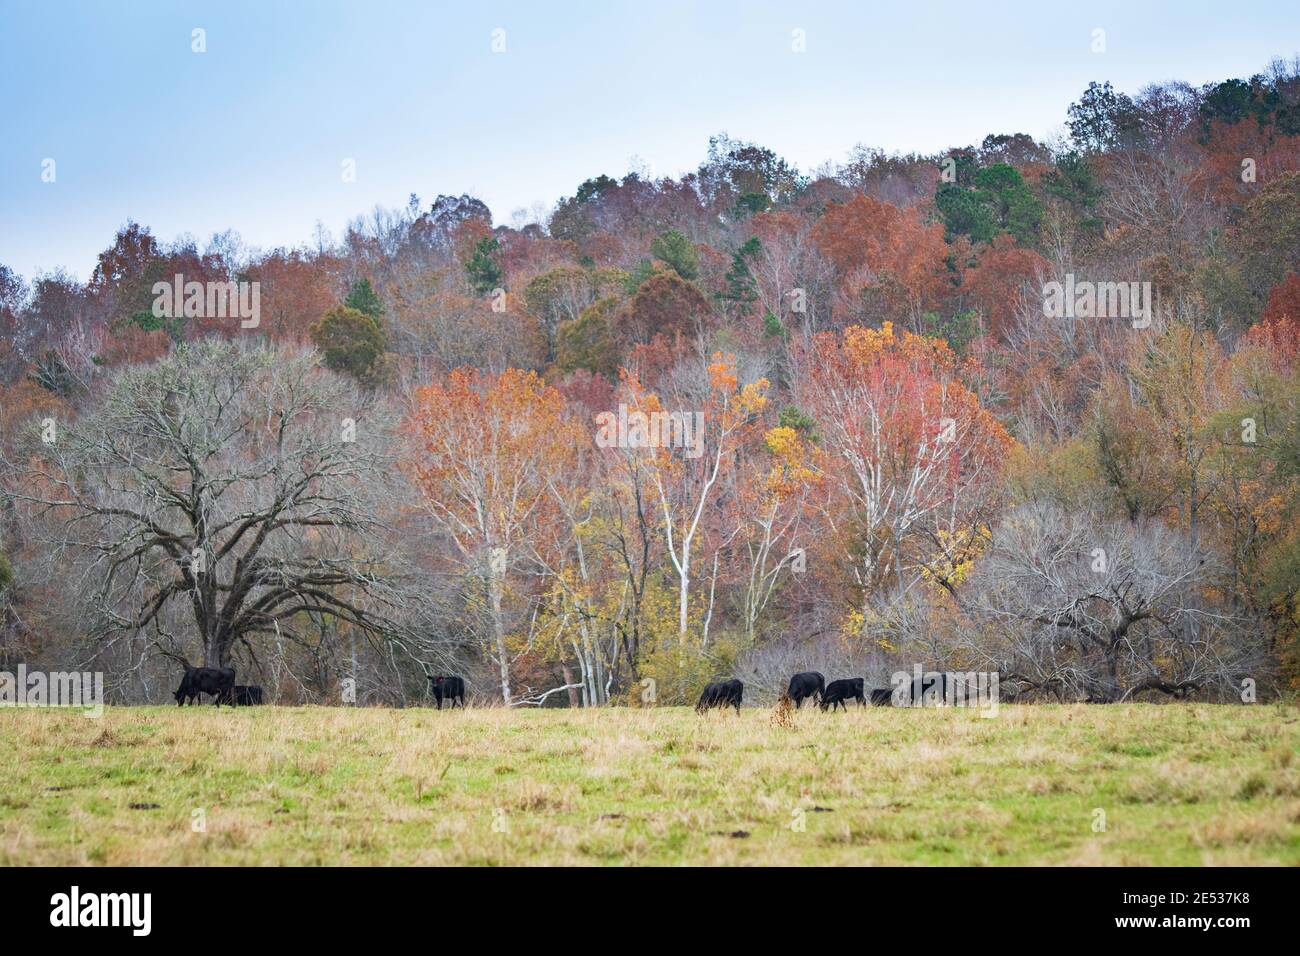 Landscape of Angus herd in autumn pasture in Appalachia with colorful hillside of trees in background. Stock Photo